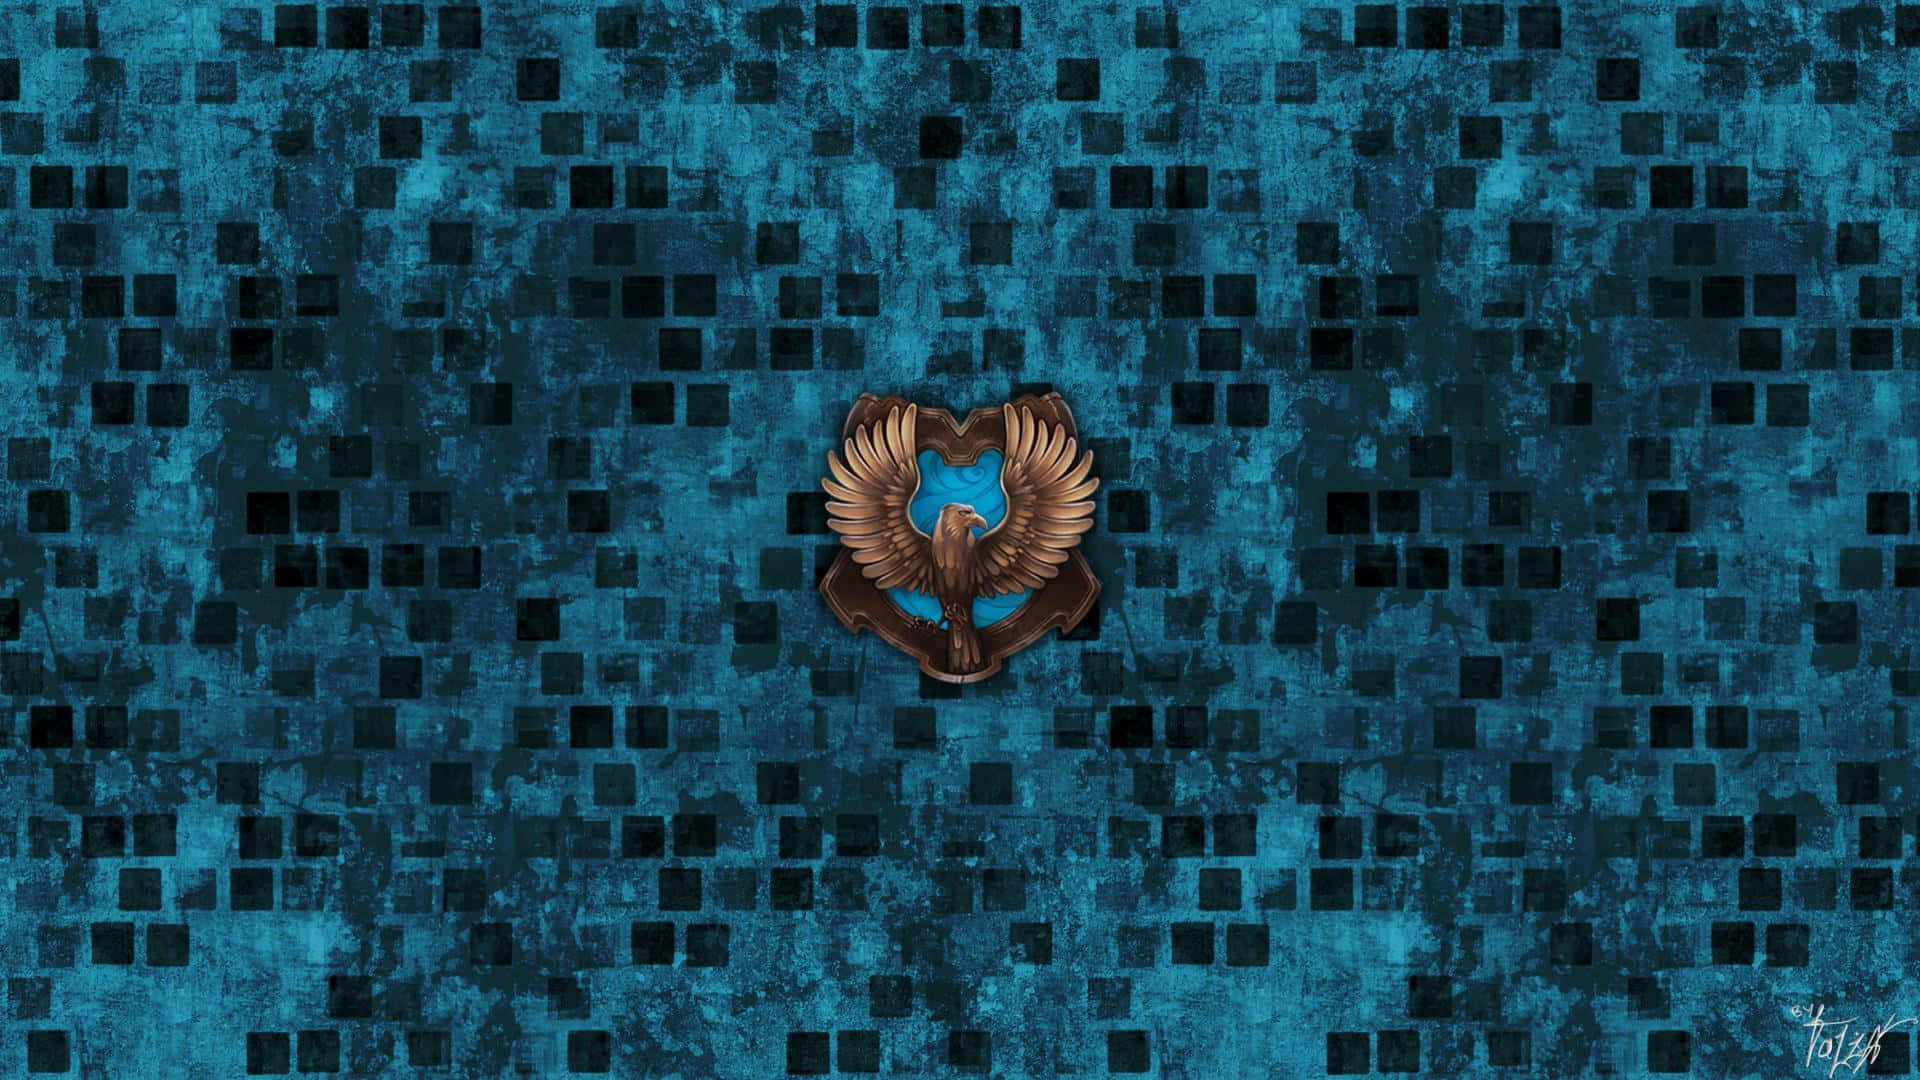 The Ravenclaw Tower of Hogwarts in Harry Potter Wallpaper